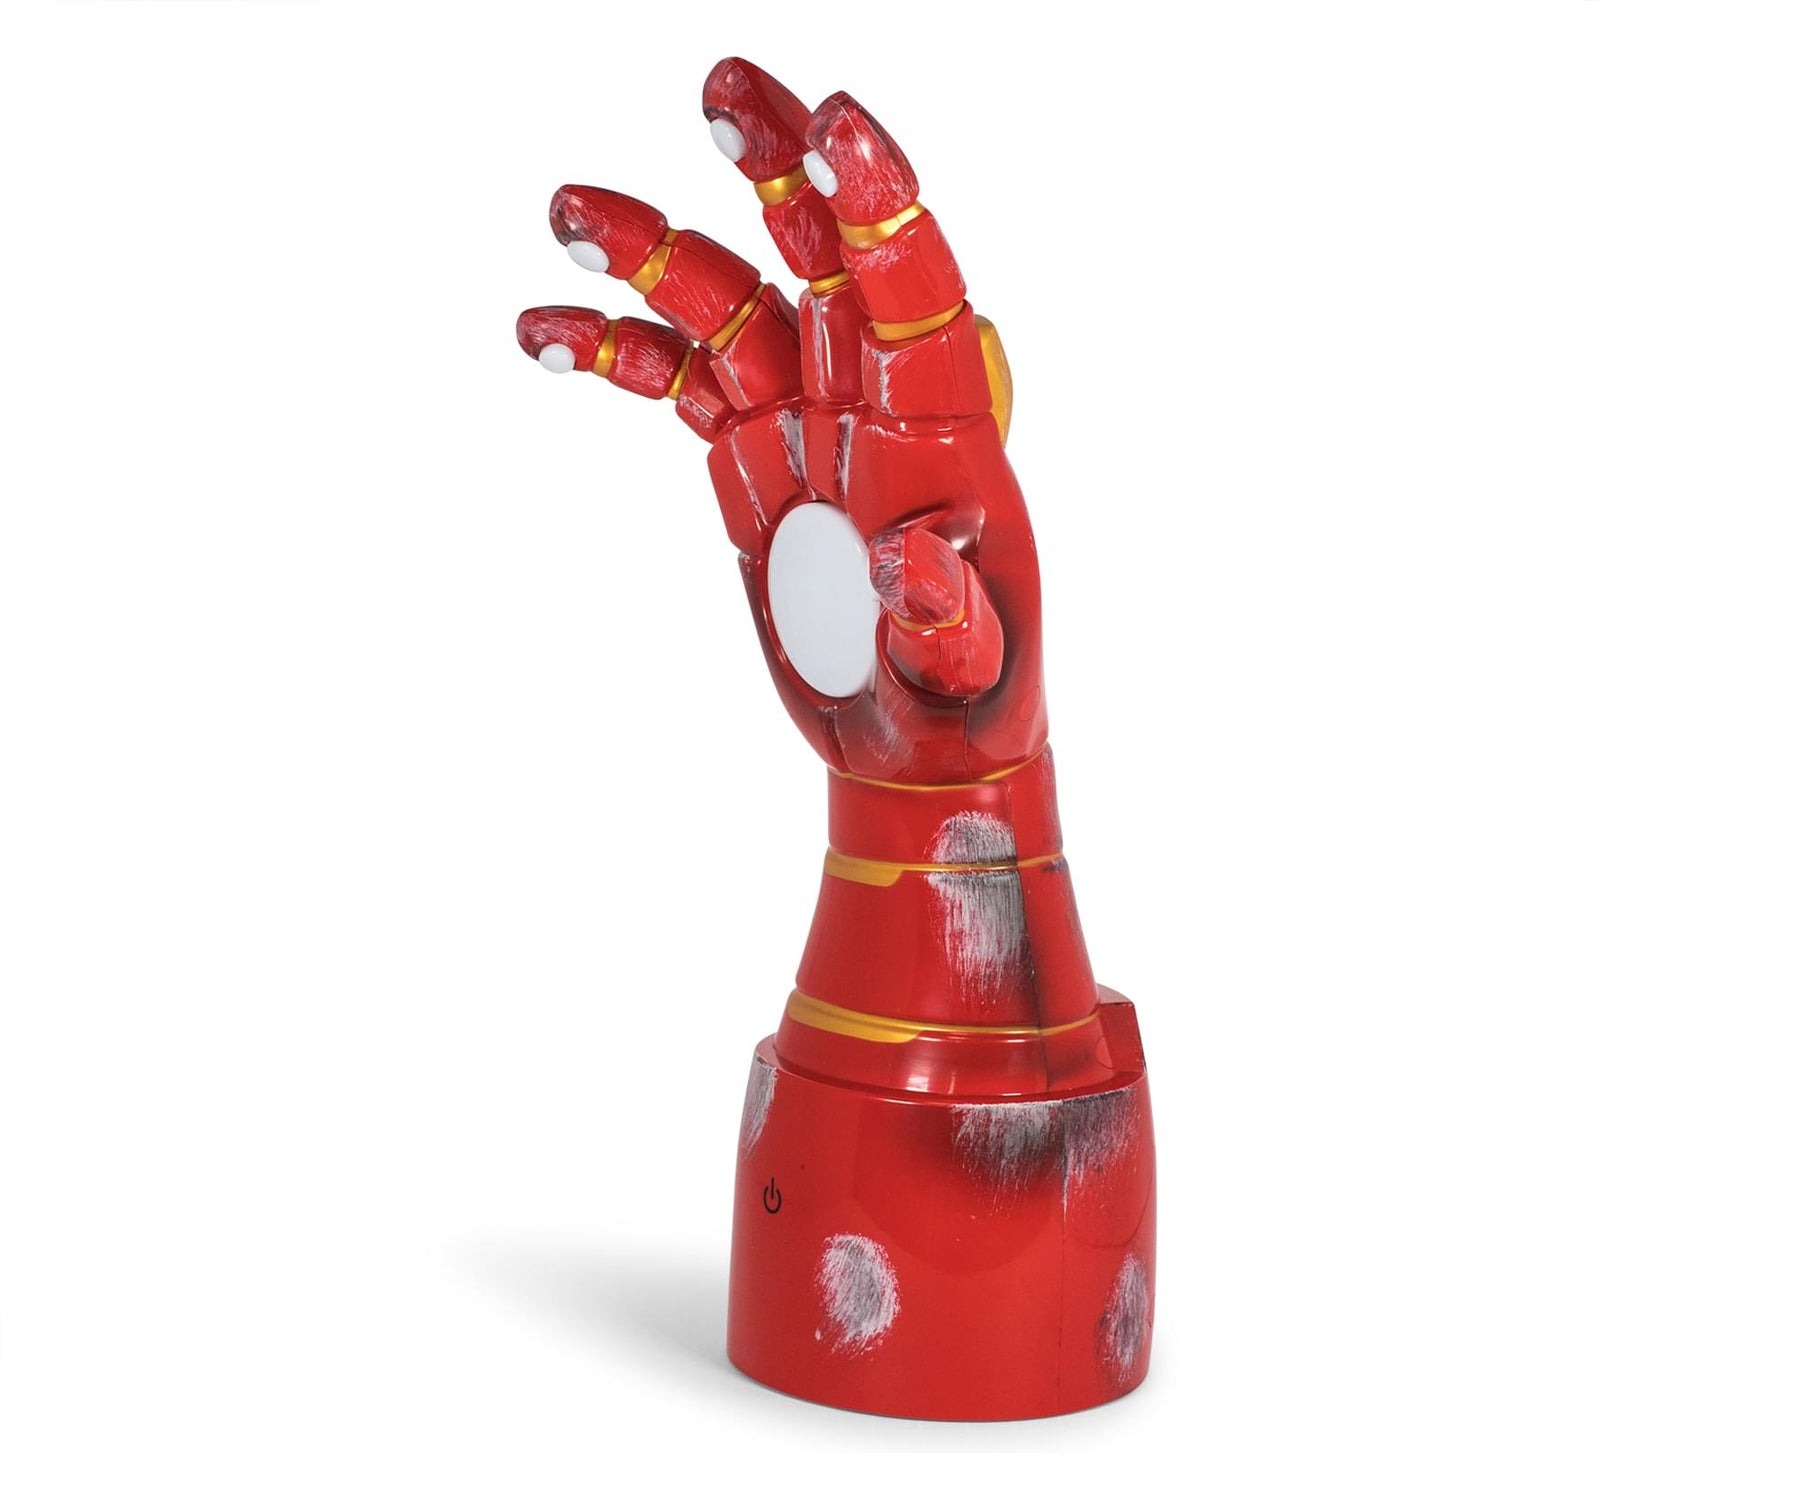 Marvel Iron Man Gauntlet Collectible LED Desk Lamp | 14 Inches